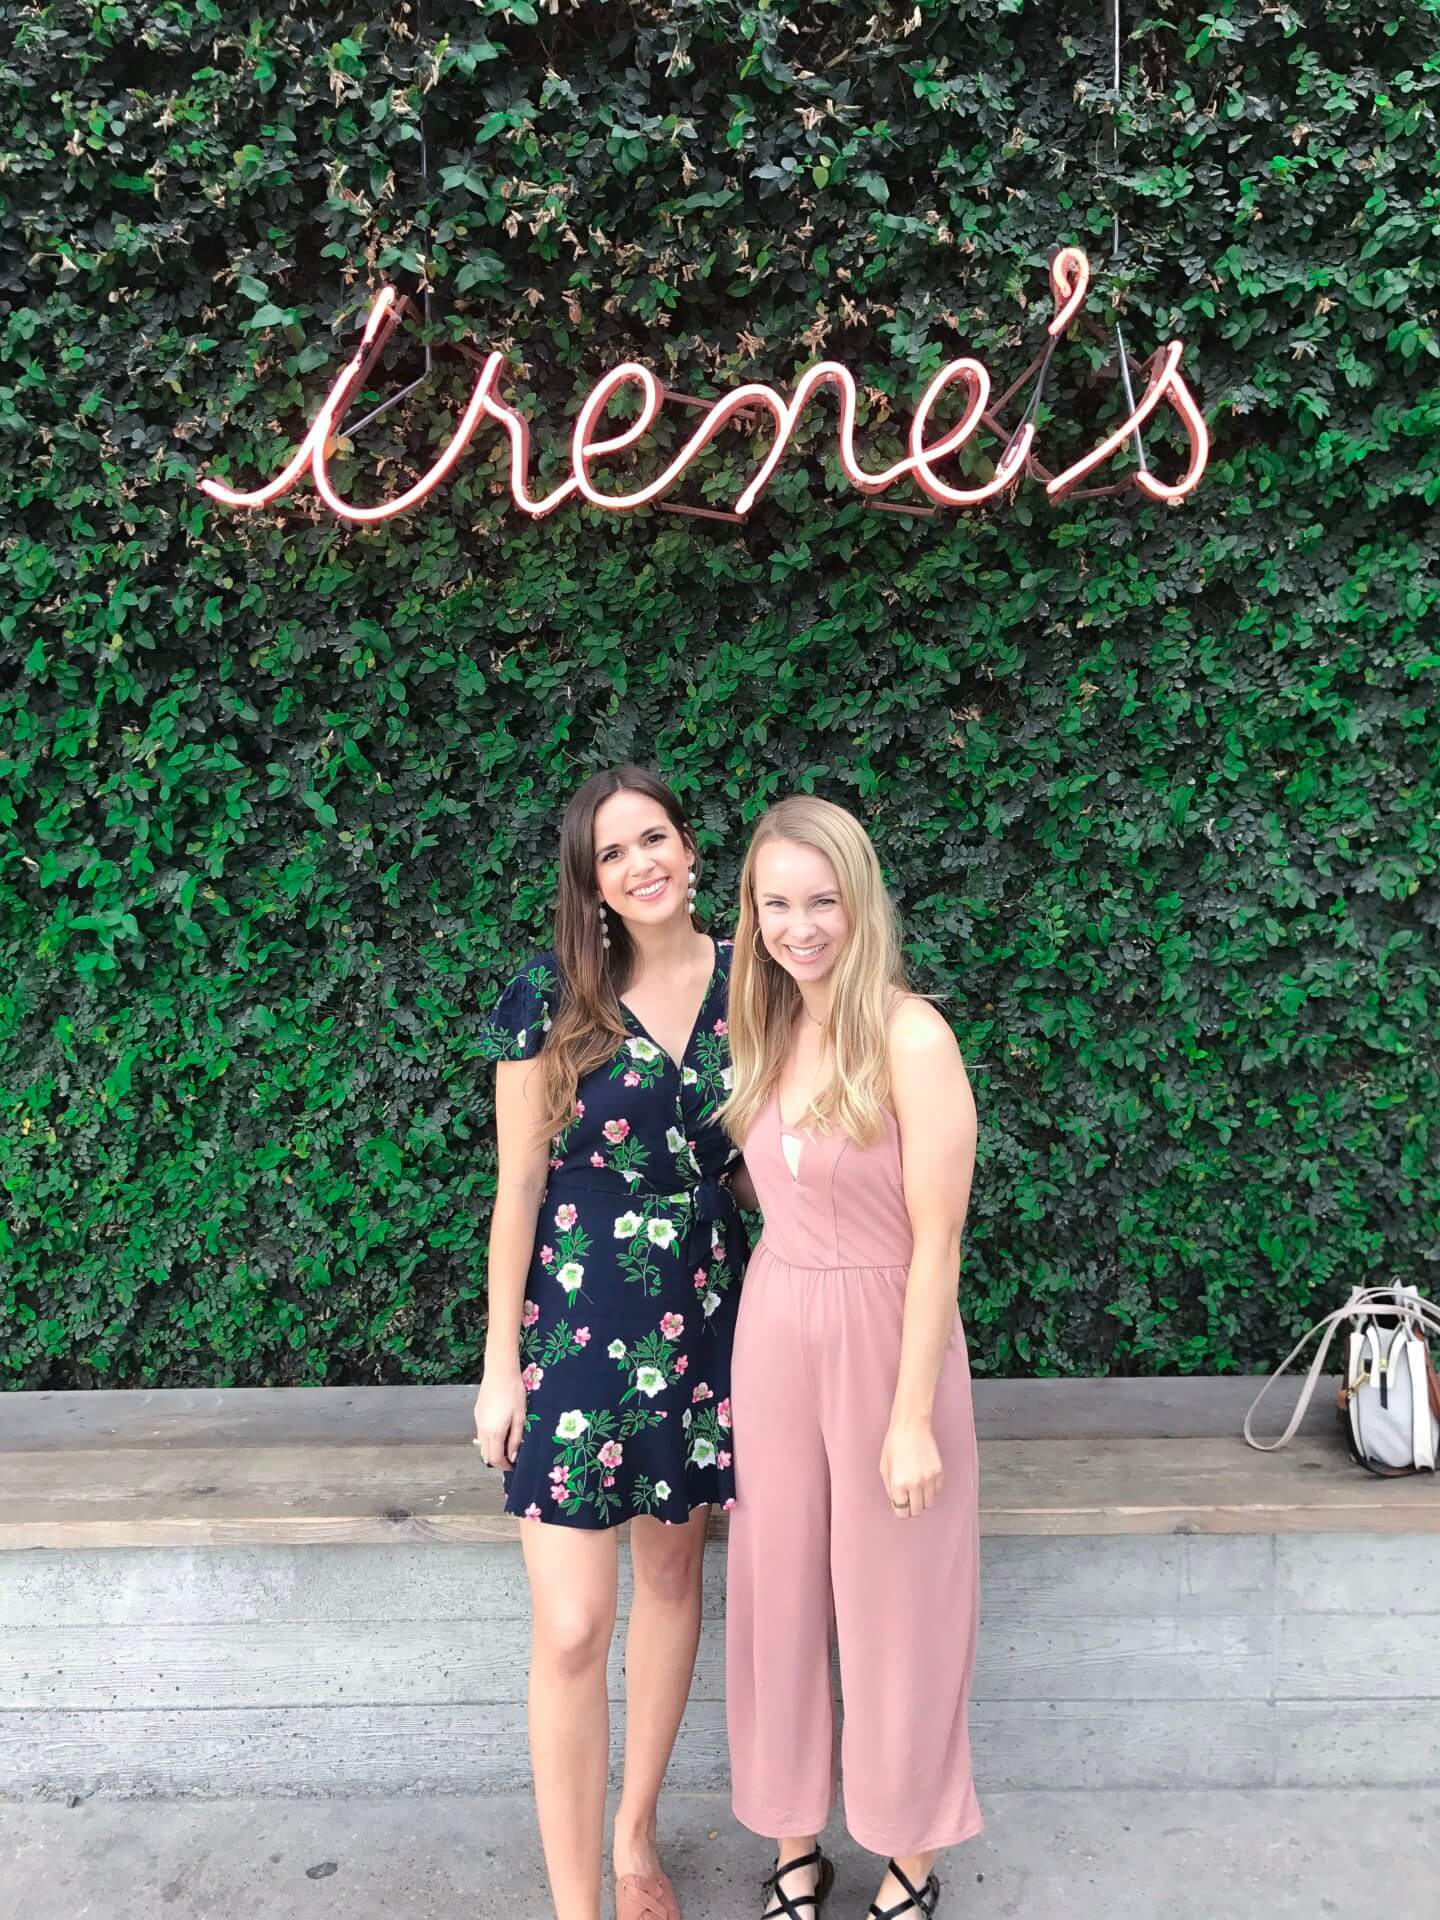 Girls trip in Austin, Texas. What we did, where we stayed and what we ate. Full review on Lone Star Court hotel | The Blonder Life